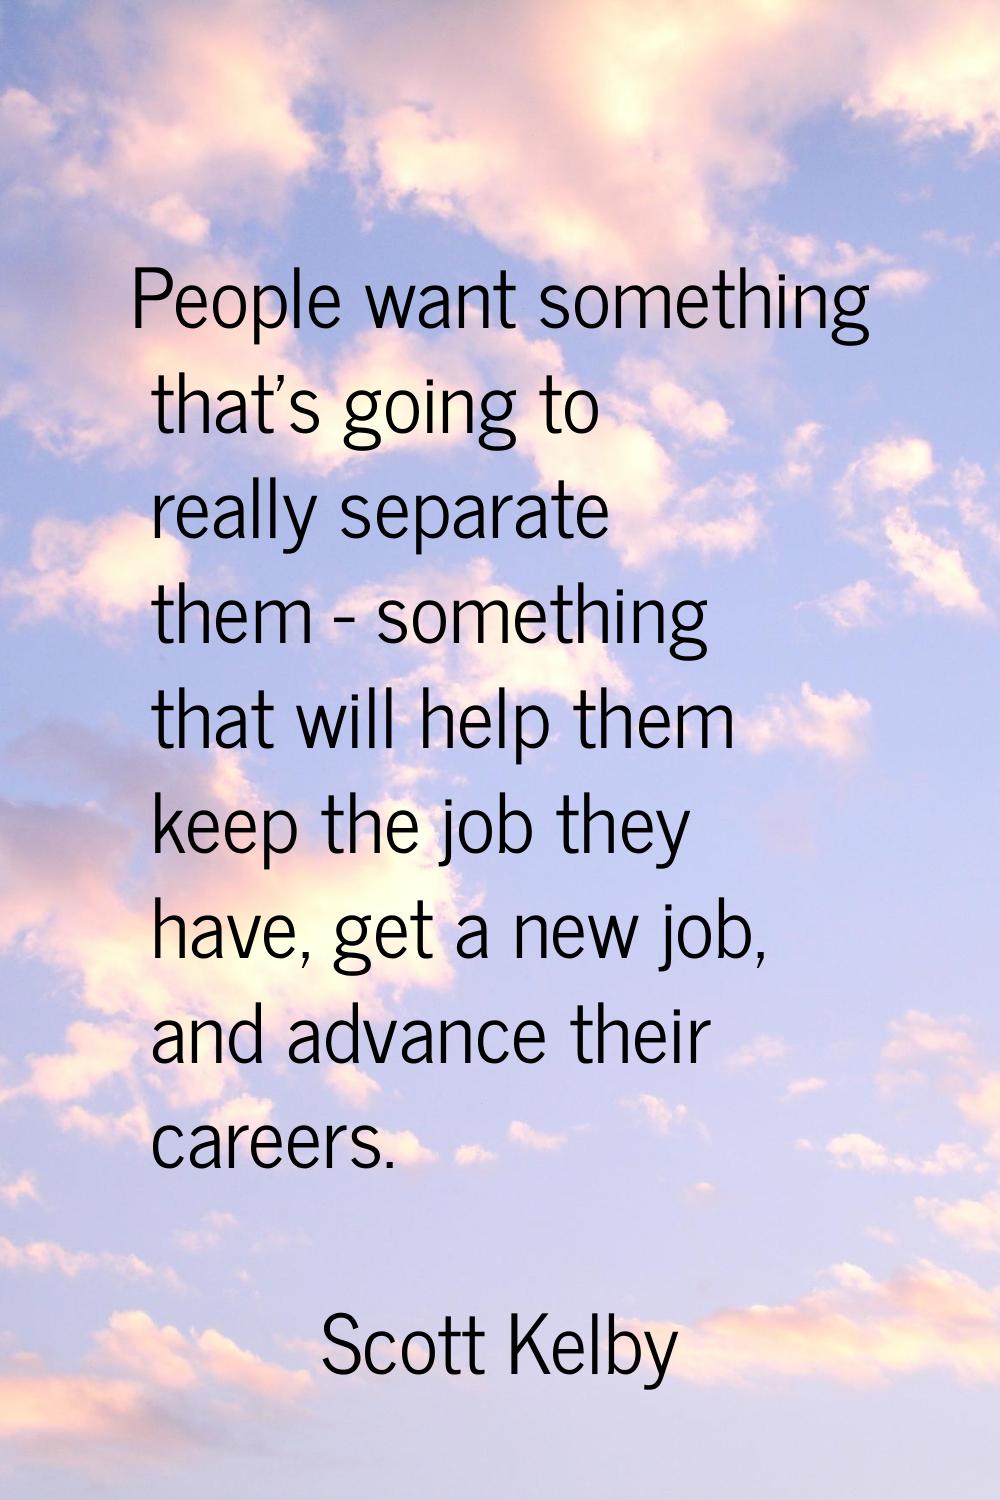 People want something that's going to really separate them - something that will help them keep the